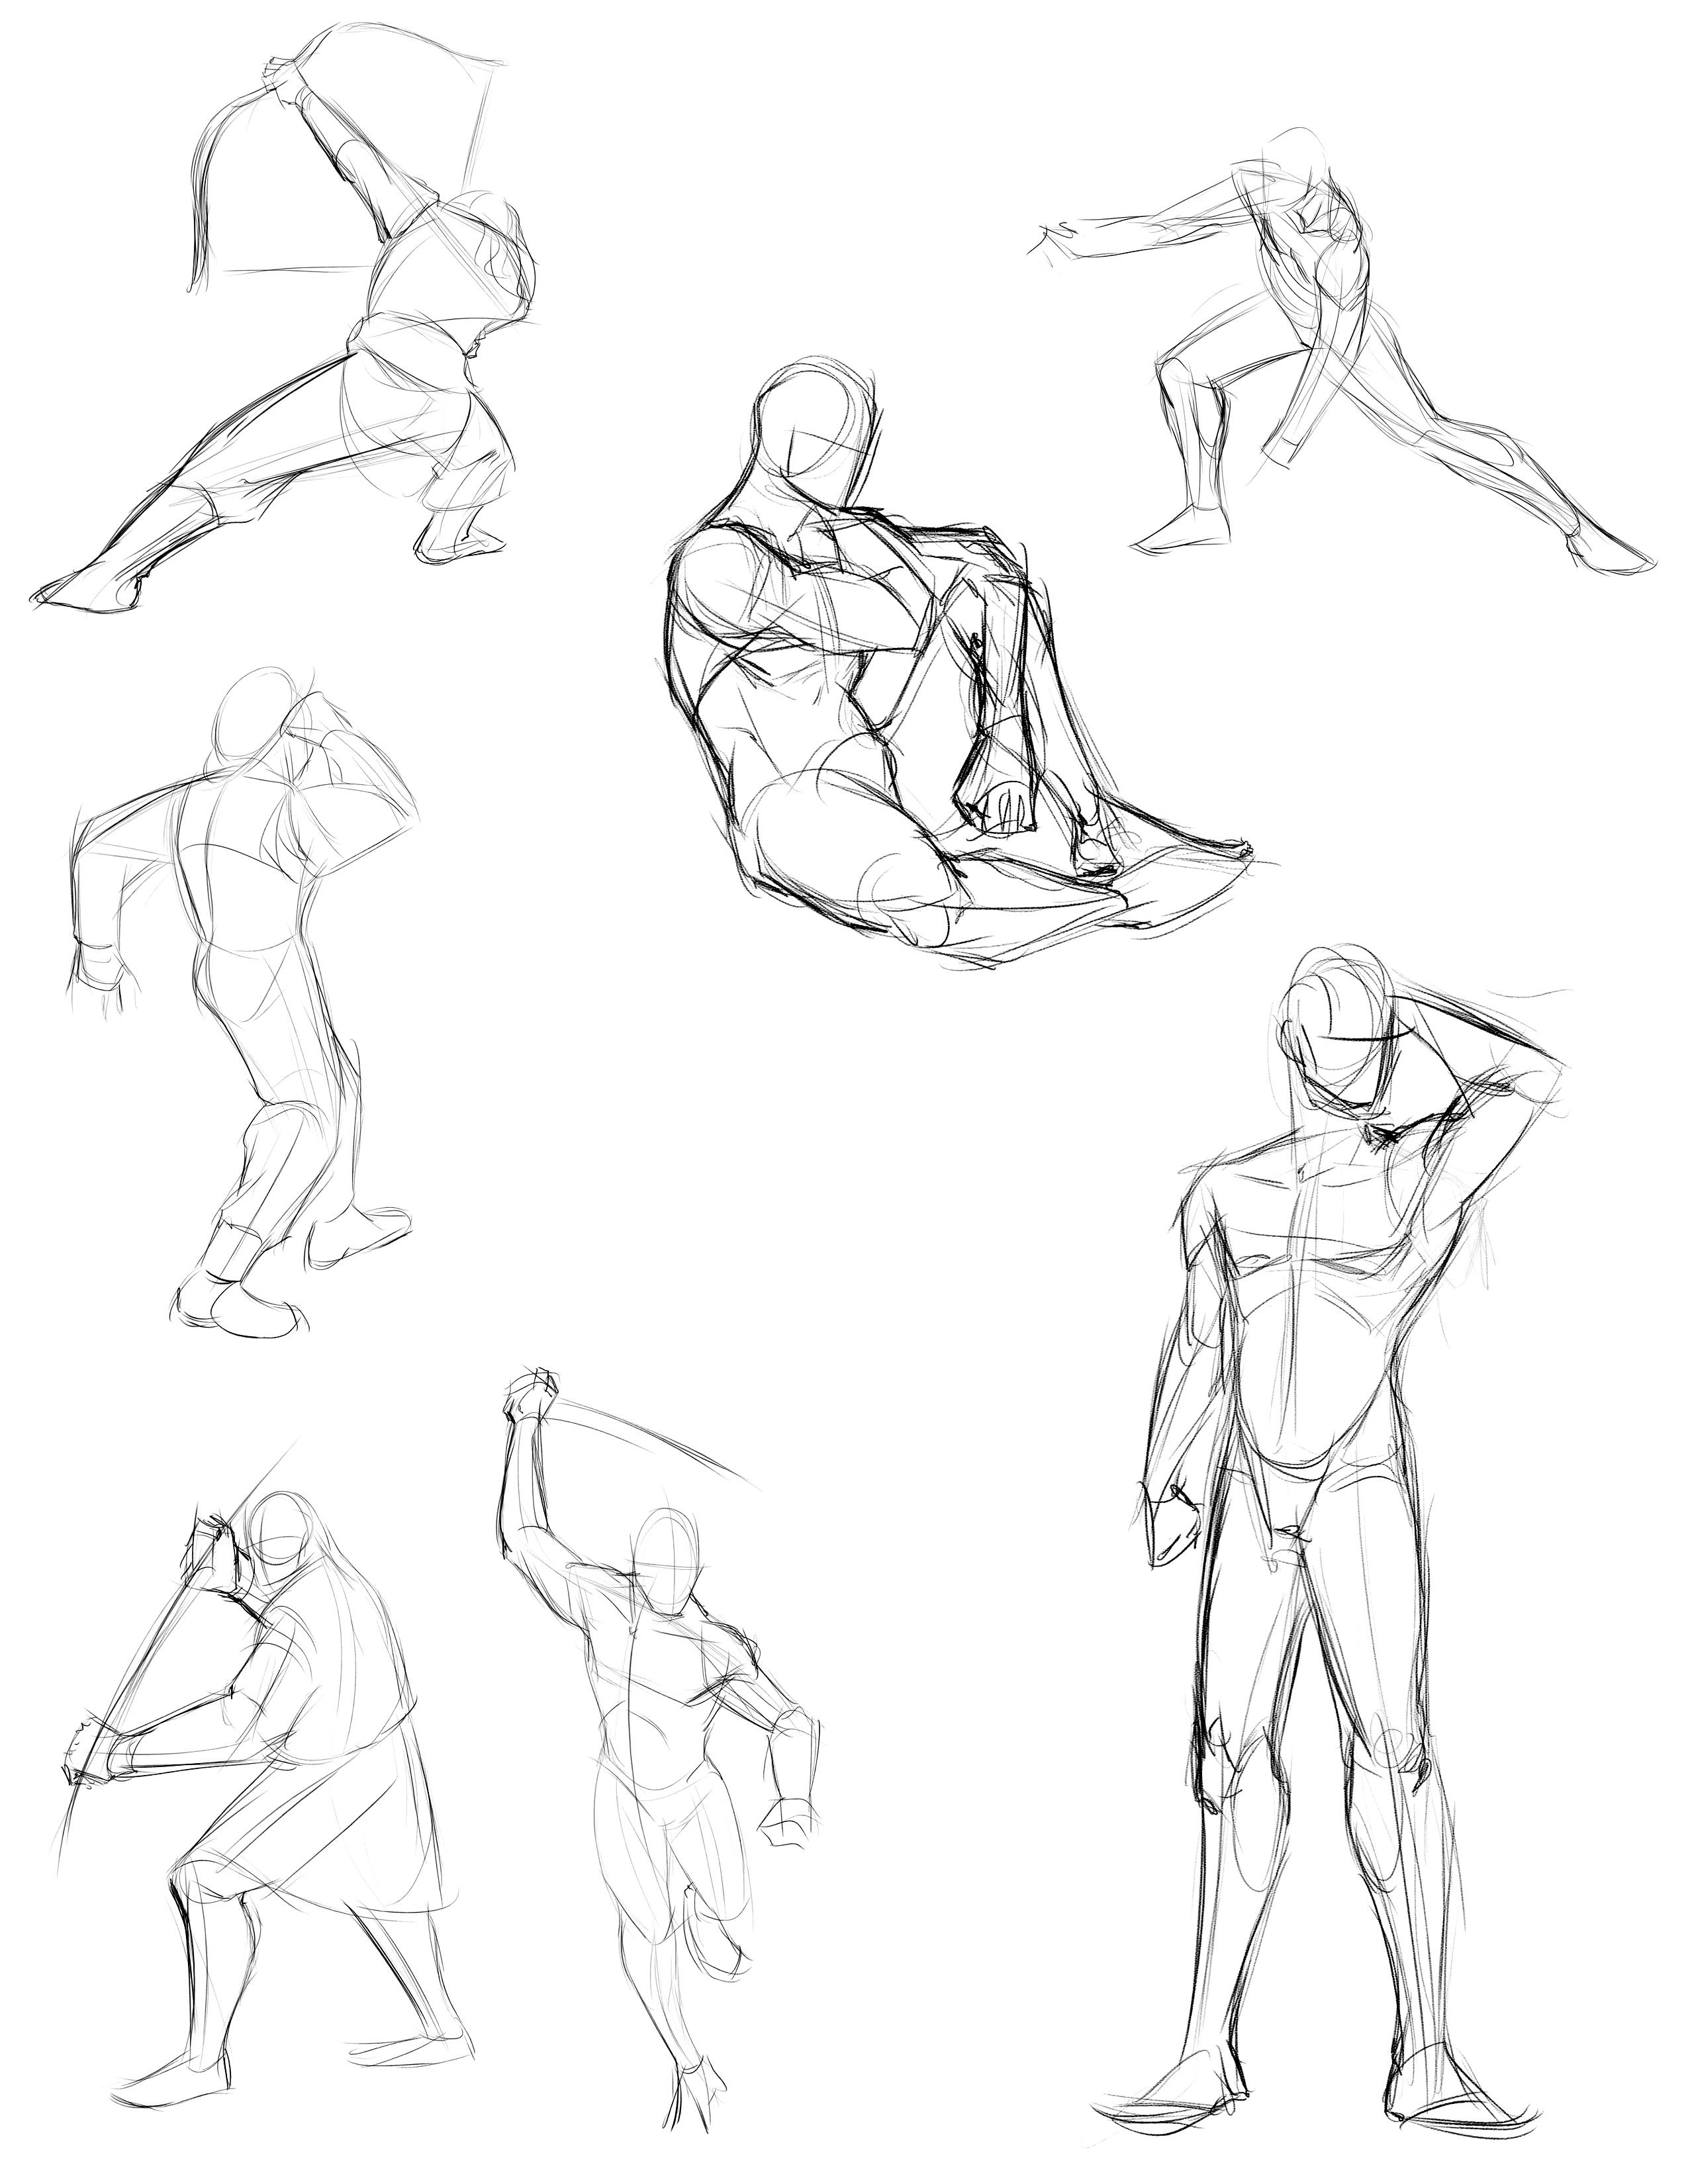 Art - Drawing action pose - step by step - — Steemit